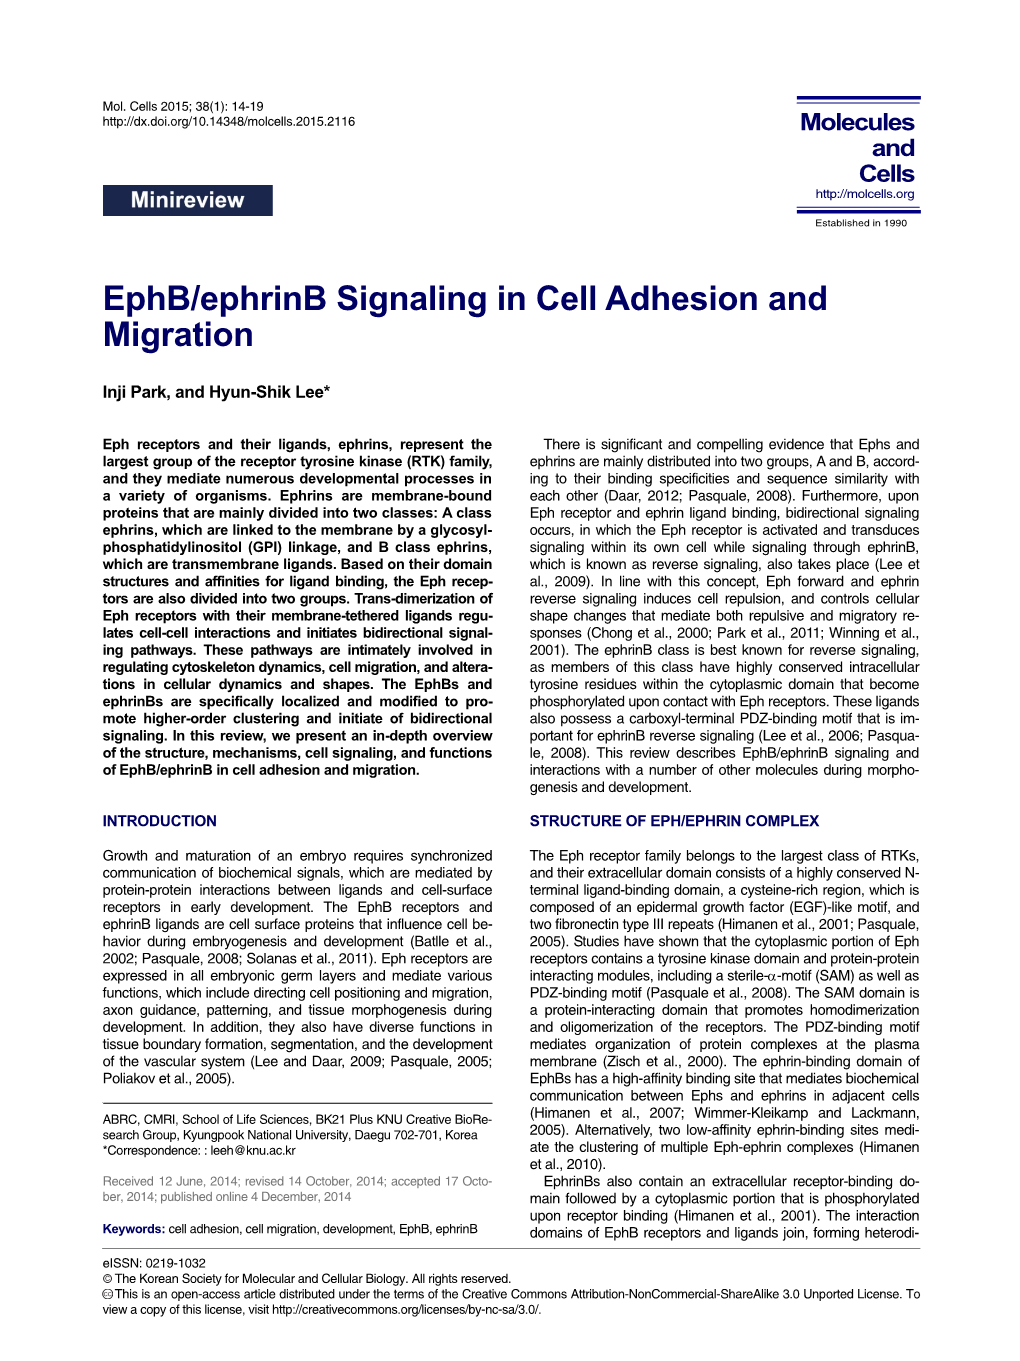 Ephb/Ephrinb Signaling in Cell Adhesion and Migration